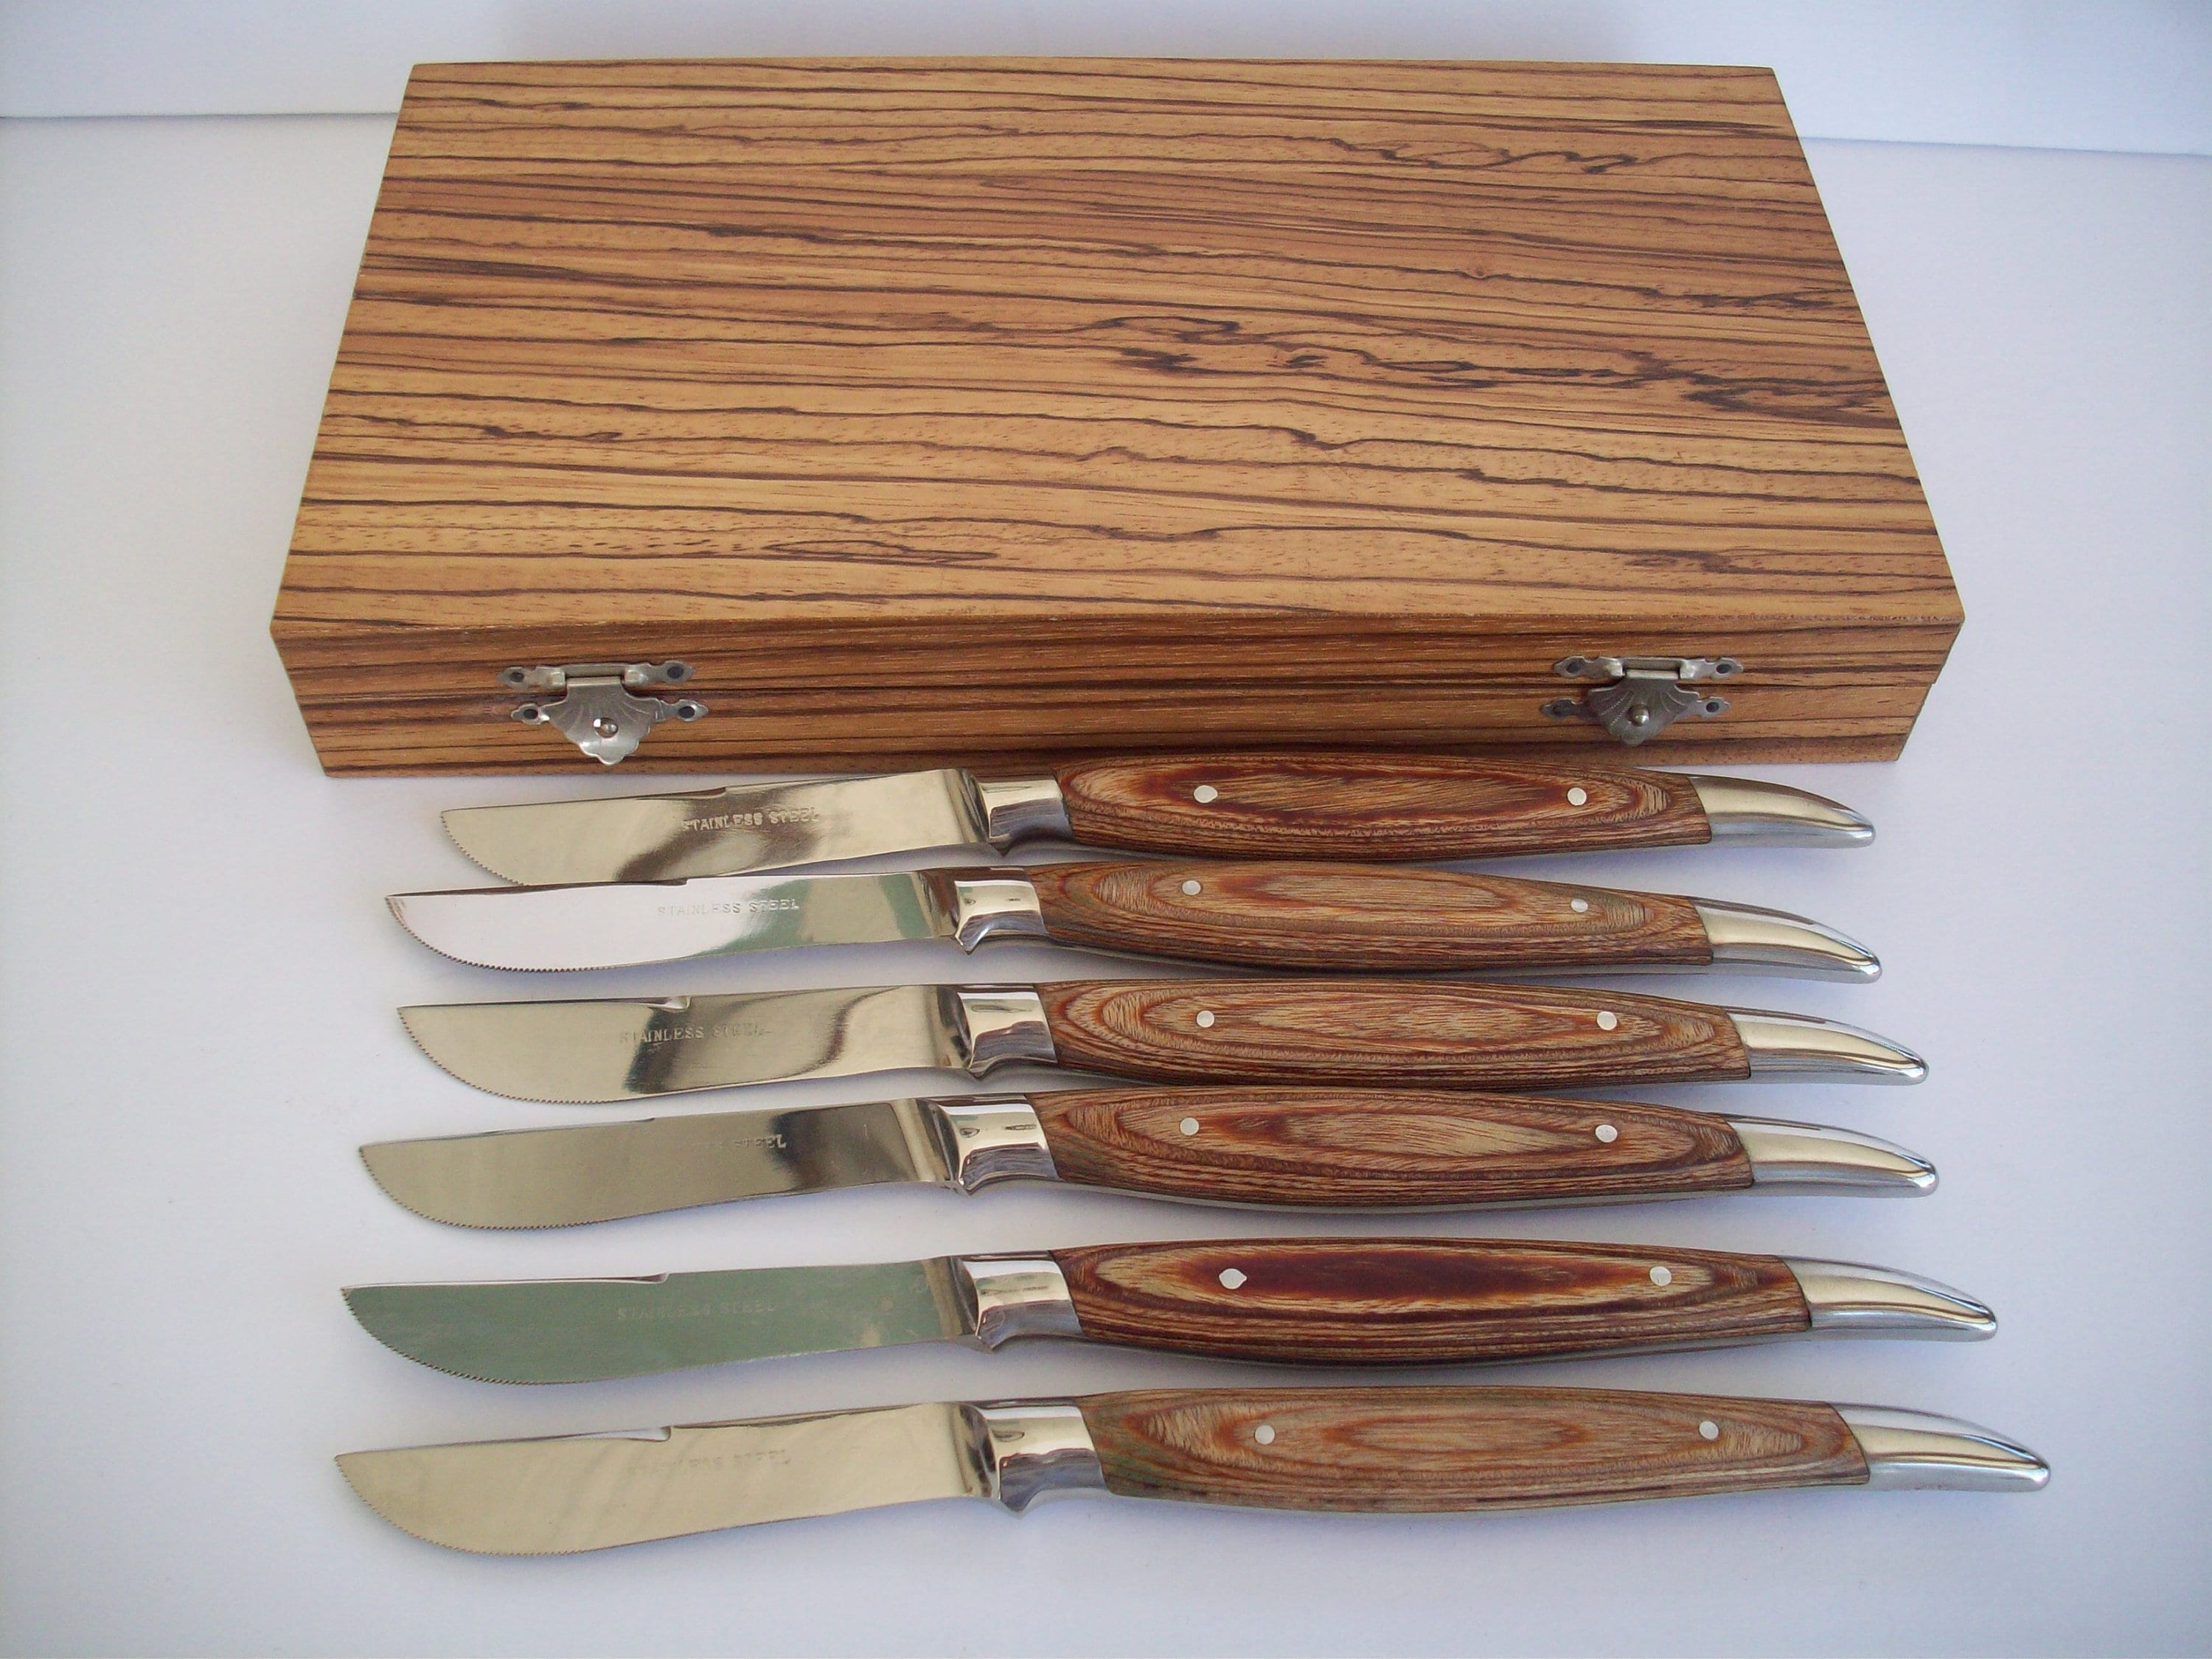 Gifts for Father's Day - Steak Knife Set of 4 in Wooden Gift Box – Steakman